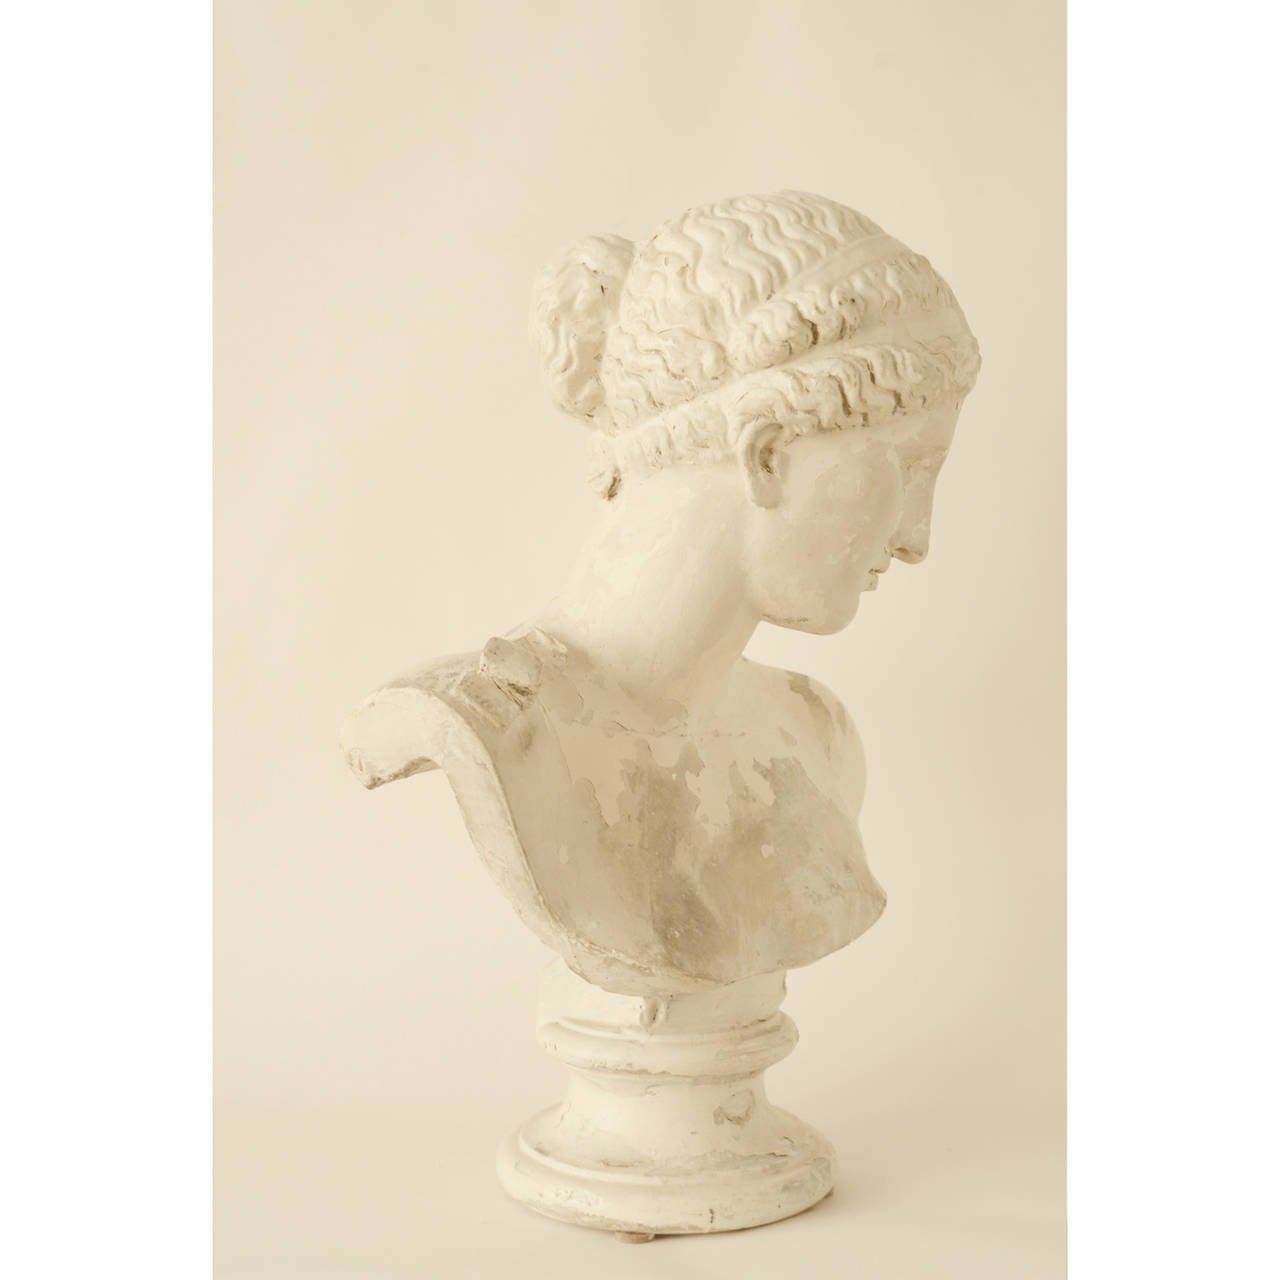 French Early 20th c. Bust of a Greco-Roman Woman